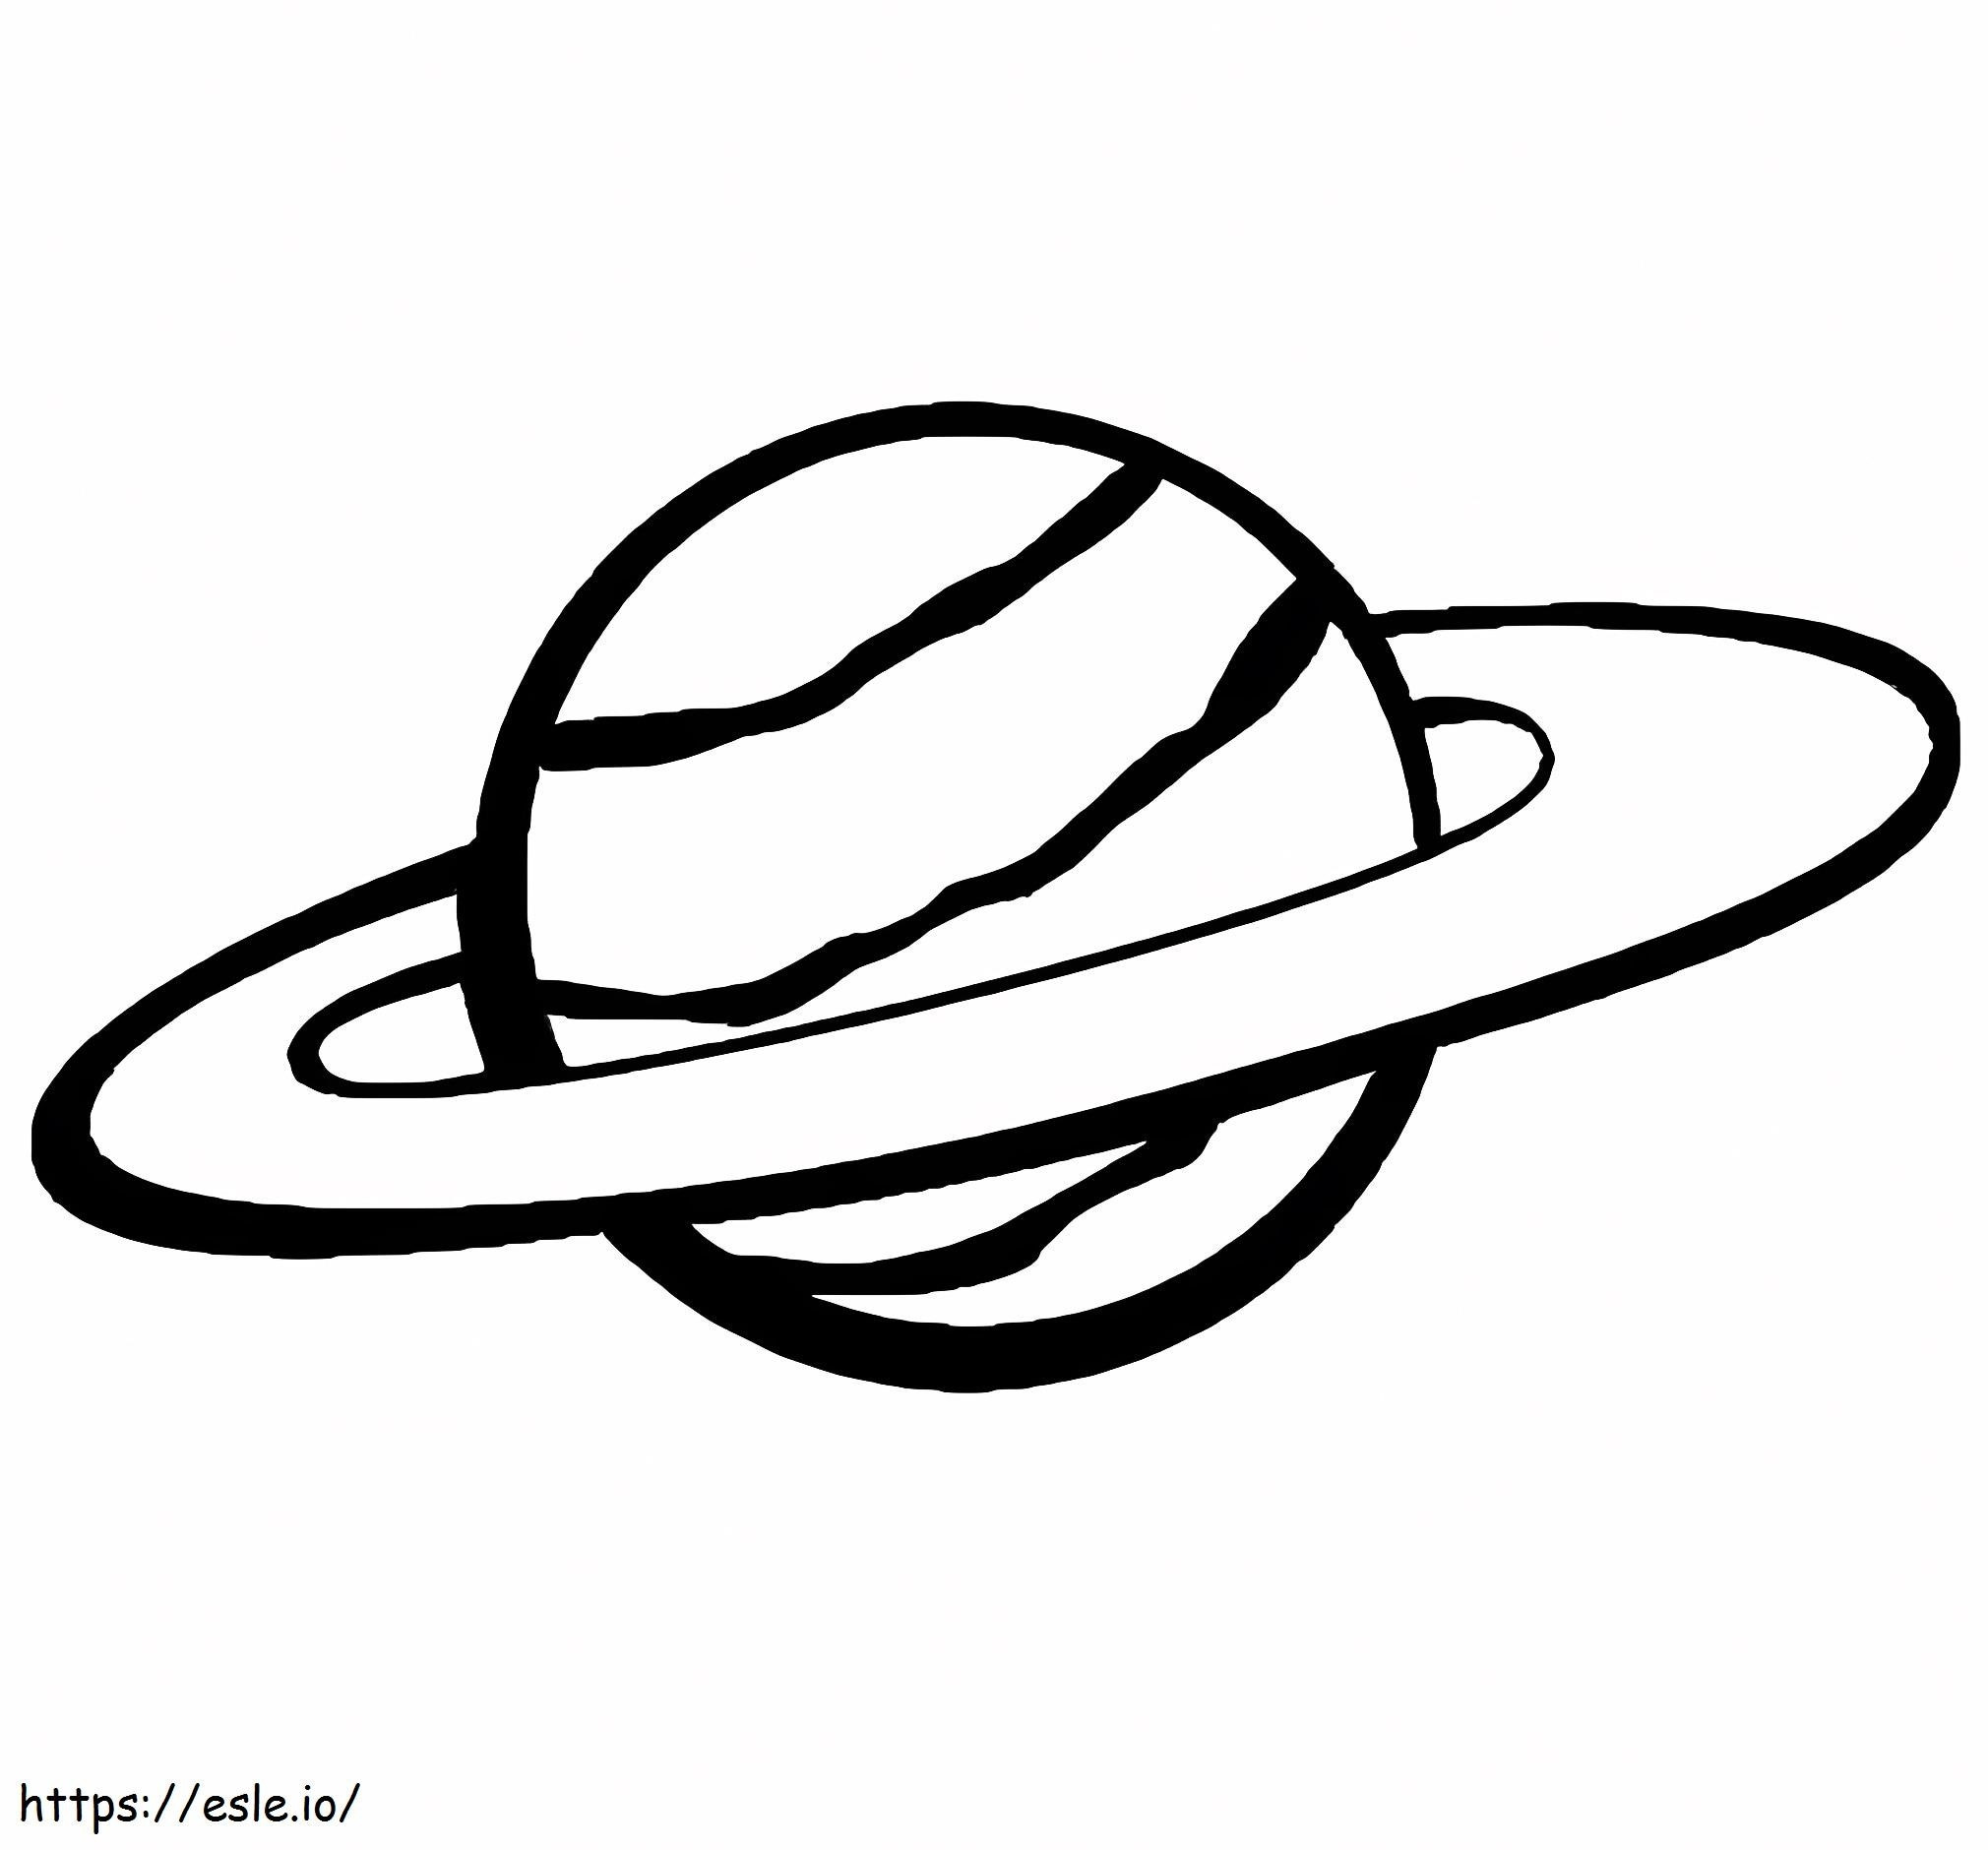 Saturn 1 coloring page